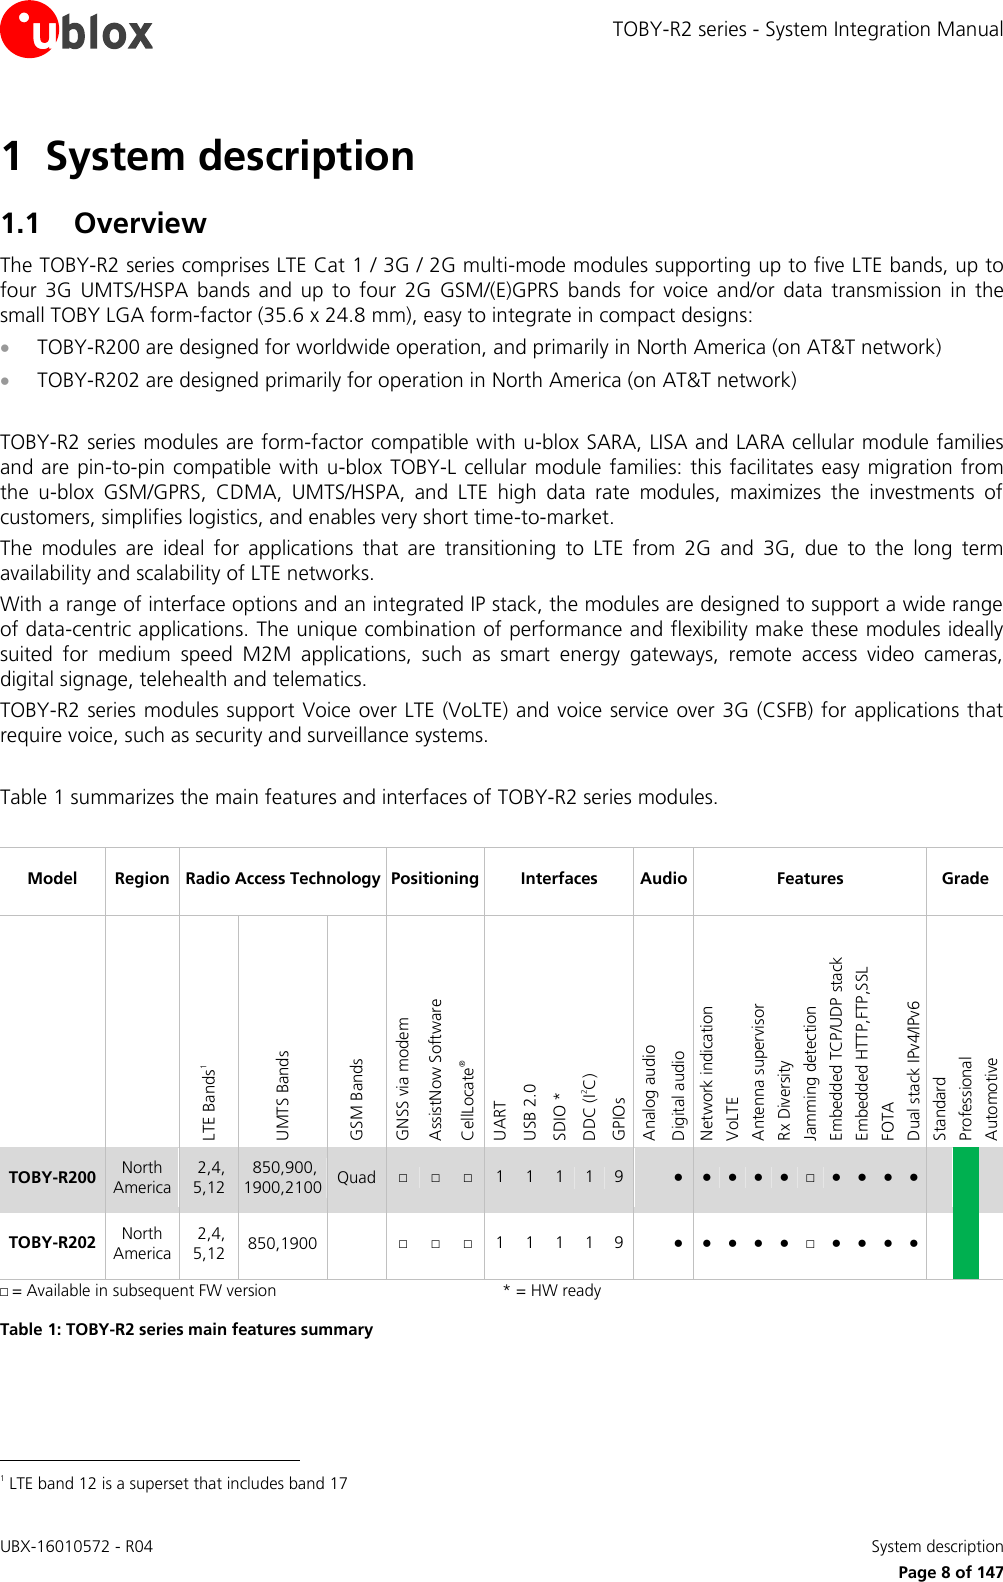 TOBY-R2 series - System Integration Manual UBX-16010572 - R04    System description     Page 8 of 147 1 System description 1.1 Overview The TOBY-R2 series comprises LTE Cat 1 / 3G / 2G multi-mode modules supporting up to five LTE bands, up to four  3G  UMTS/HSPA  bands  and  up  to  four 2G  GSM/(E)GPRS  bands for  voice  and/or  data  transmission  in  the small TOBY LGA form-factor (35.6 x 24.8 mm), easy to integrate in compact designs:  TOBY-R200 are designed for worldwide operation, and primarily in North America (on AT&amp;T network)   TOBY-R202 are designed primarily for operation in North America (on AT&amp;T network)  TOBY-R2 series modules are form-factor compatible with u-blox SARA, LISA and LARA cellular module families and are pin-to-pin compatible with u-blox TOBY-L cellular module families: this facilitates  easy  migration from the  u-blox  GSM/GPRS,  CDMA,  UMTS/HSPA,  and  LTE  high  data  rate  modules,  maximizes  the  investments  of customers, simplifies logistics, and enables very short time-to-market. The  modules  are  ideal  for  applications  that  are  transitioning  to  LTE  from  2G  and  3G,  due  to  the  long  term availability and scalability of LTE networks. With a range of interface options and an integrated IP stack, the modules are designed to support a wide range of data-centric applications. The unique combination of performance and flexibility make these modules ideally suited  for  medium  speed  M2M  applications,  such  as  smart  energy  gateways,  remote  access  video  cameras, digital signage, telehealth and telematics. TOBY-R2 series modules support Voice over LTE (VoLTE) and voice service over 3G (CSFB) for applications that require voice, such as security and surveillance systems.  Table 1 summarizes the main features and interfaces of TOBY-R2 series modules.  Model Region Radio Access Technology Positioning Interfaces Audio Features Grade   LTE Bands1 UMTS Bands GSM Bands GNSS via modem AssistNow Software CellLocate® UART USB 2.0 SDIO * DDC (I2C) GPIOs Analog audio Digital audio  Network indication VoLTE  Antenna supervisor Rx Diversity Jamming detection Embedded TCP/UDP stack Embedded HTTP,FTP,SSL FOTA Dual stack IPv4/IPv6 Standard Professional Automotive TOBY-R200 North America  2,4, 5,12  850,900, 1900,2100 Quad □ □ □ 1 1 1 1 9  ● ● ● ● ● □ ● ● ● ●    TOBY-R202 North America  2,4, 5,12 850,1900  □ □ □ 1 1 1 1 9  ● ● ● ● ● □ ● ● ● ●    □ = Available in subsequent FW version * = HW ready Table 1: TOBY-R2 series main features summary                                                        1 LTE band 12 is a superset that includes band 17 